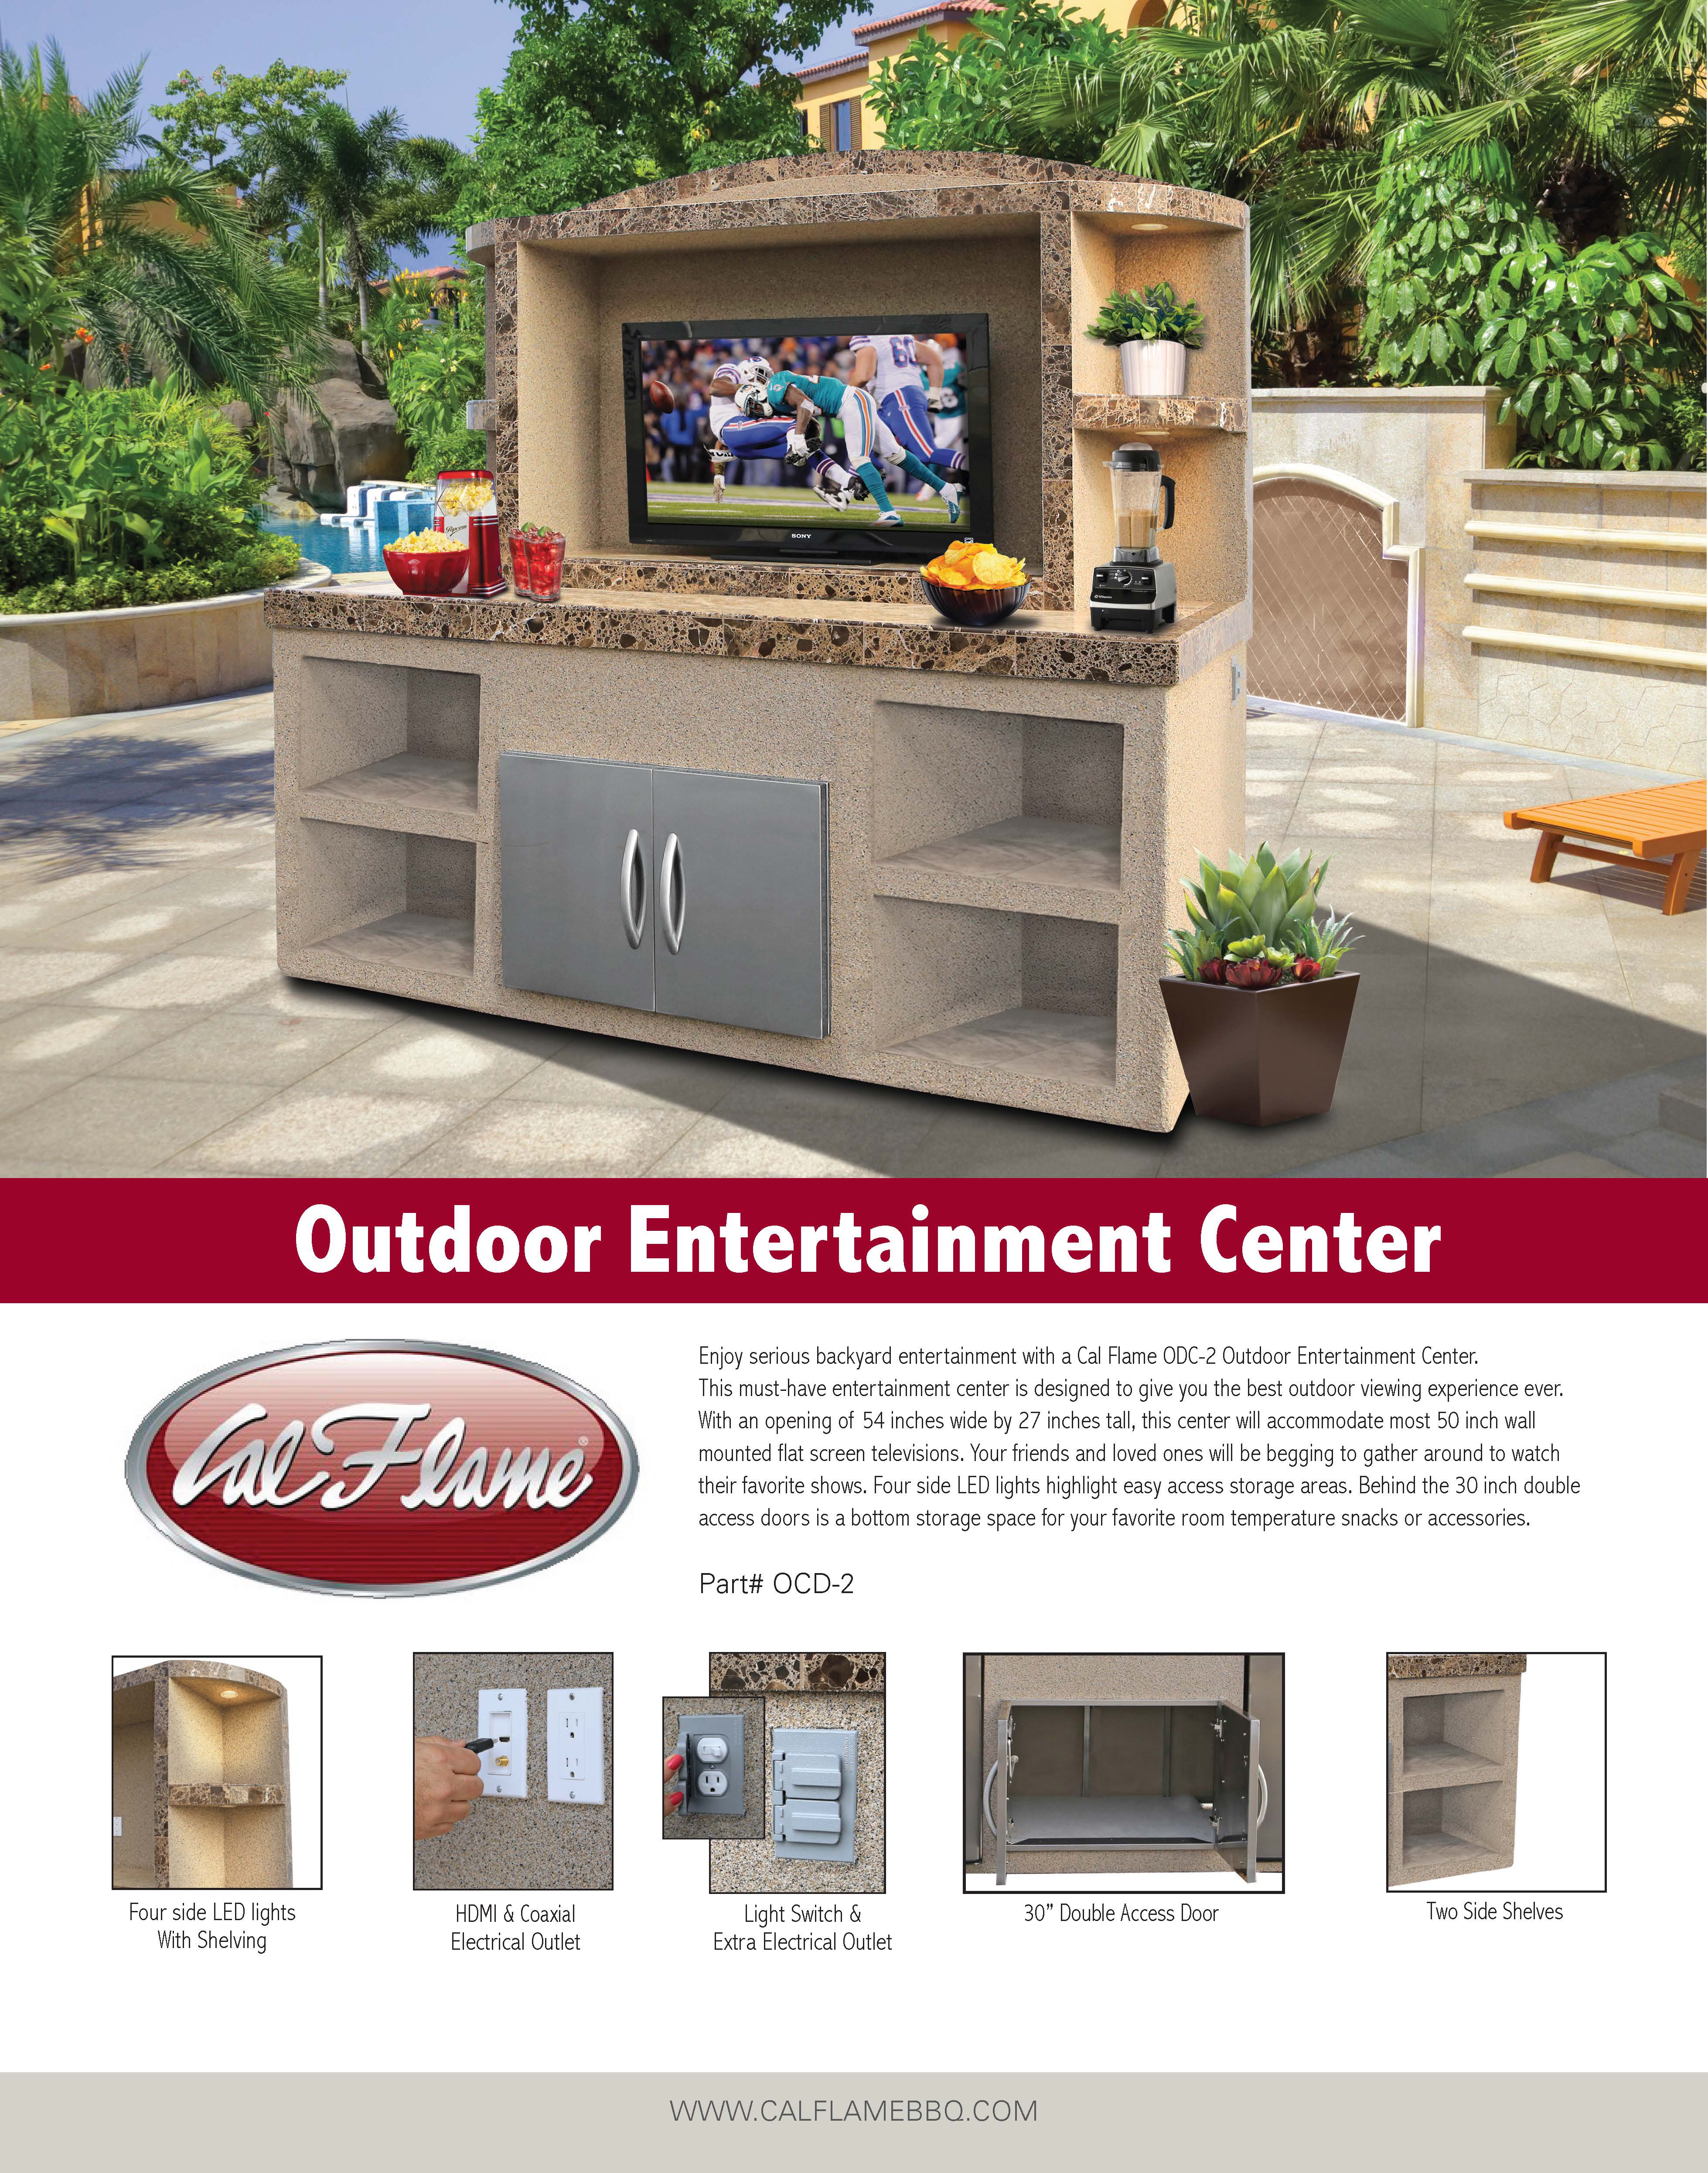 Cal Flame ODC-2 Crystal Entertainment Center